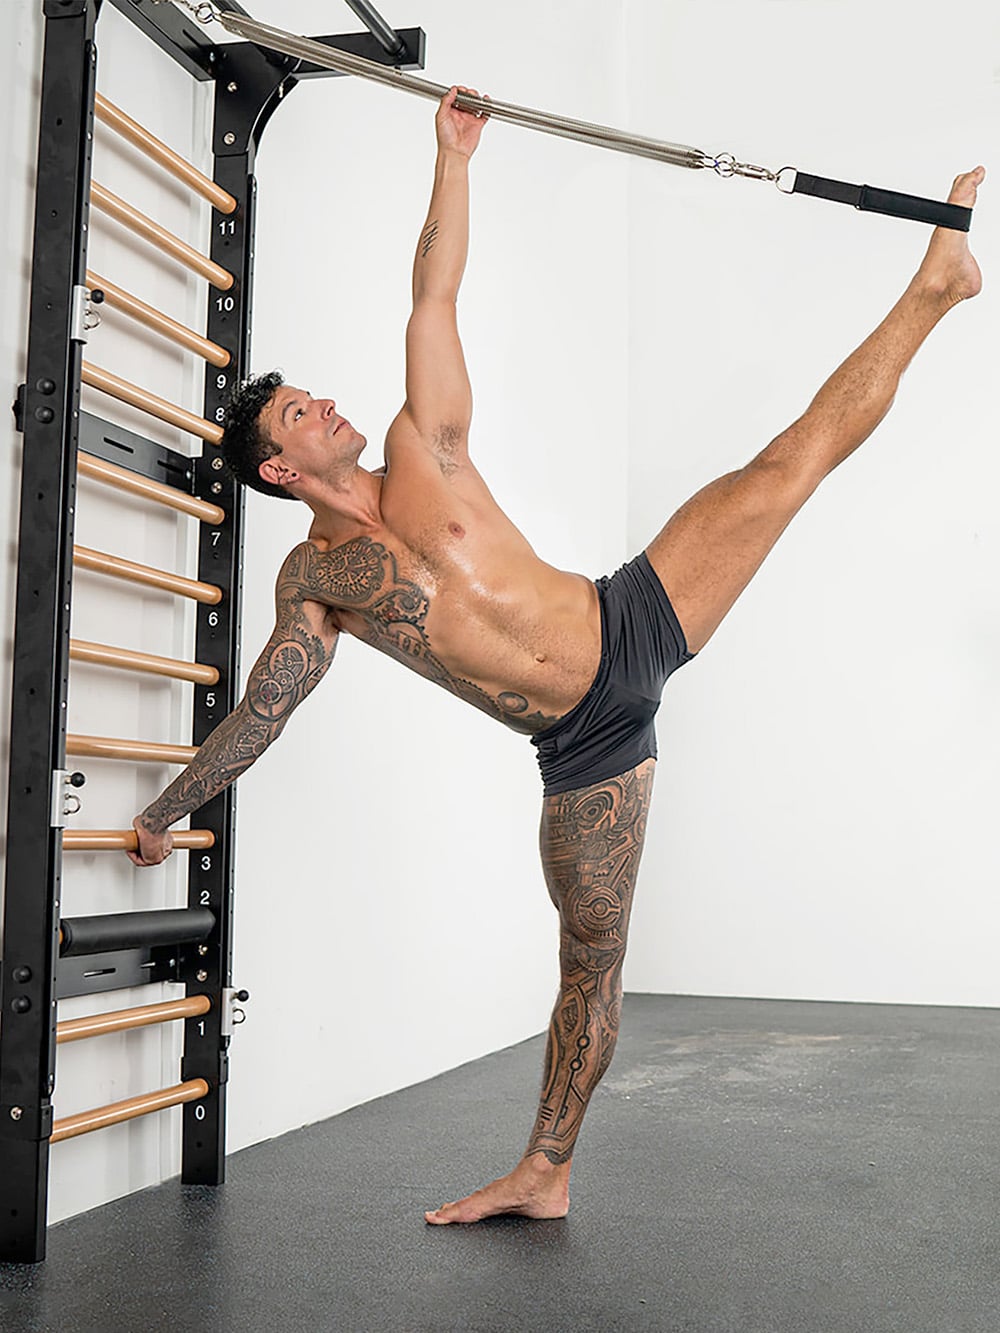 Fitness guru uses the Fuse Ladder Pilates apparatus to stretch and strengthen core.